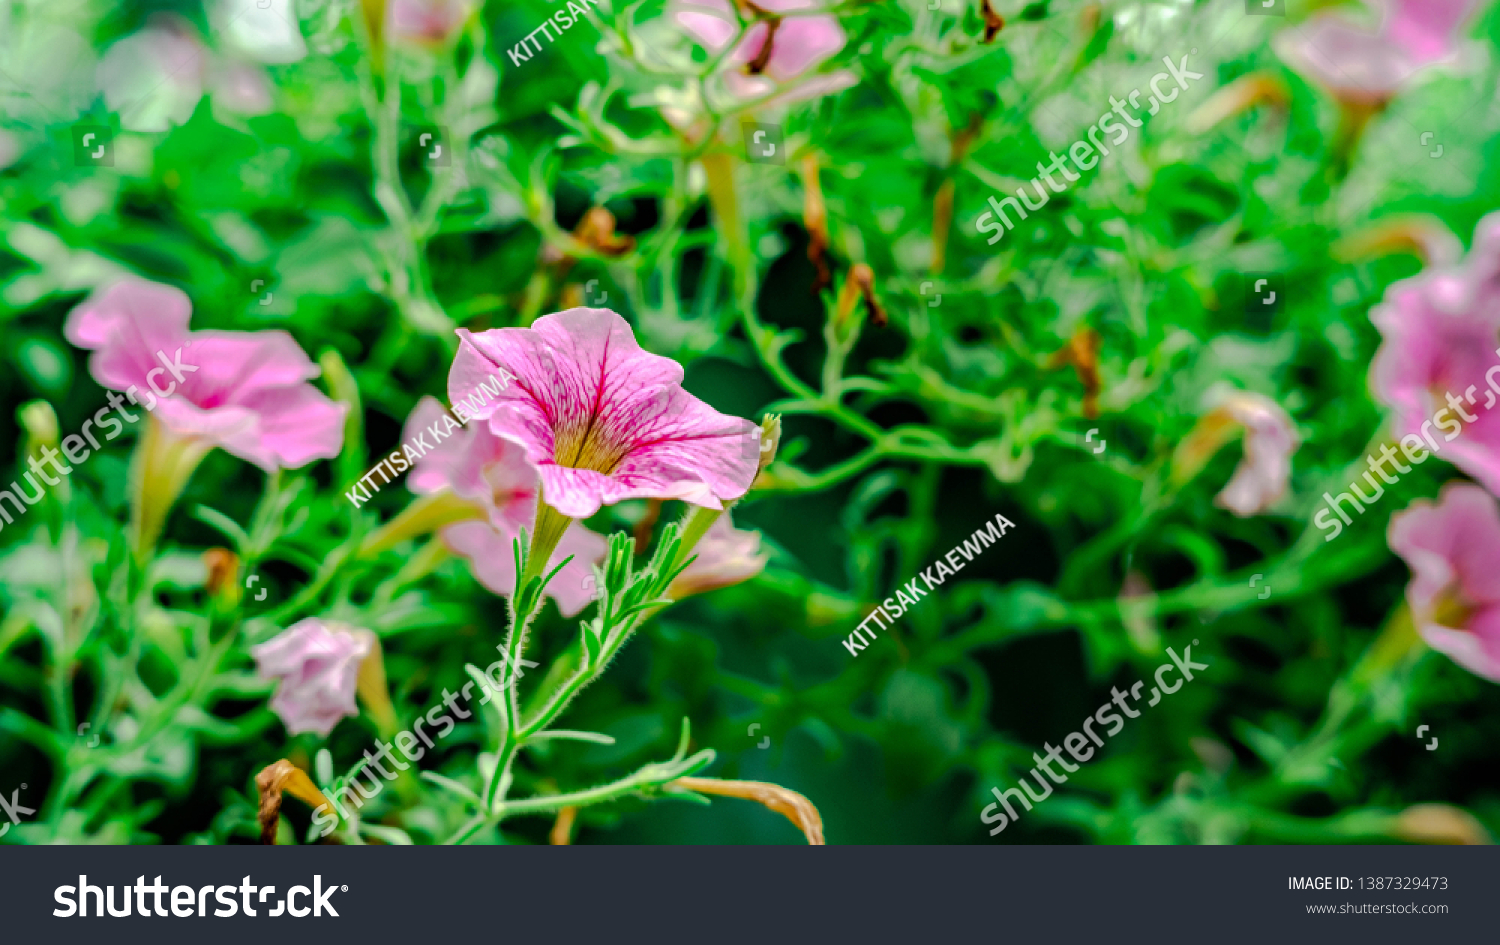 Various flowers that bloom in the summer #1387329473